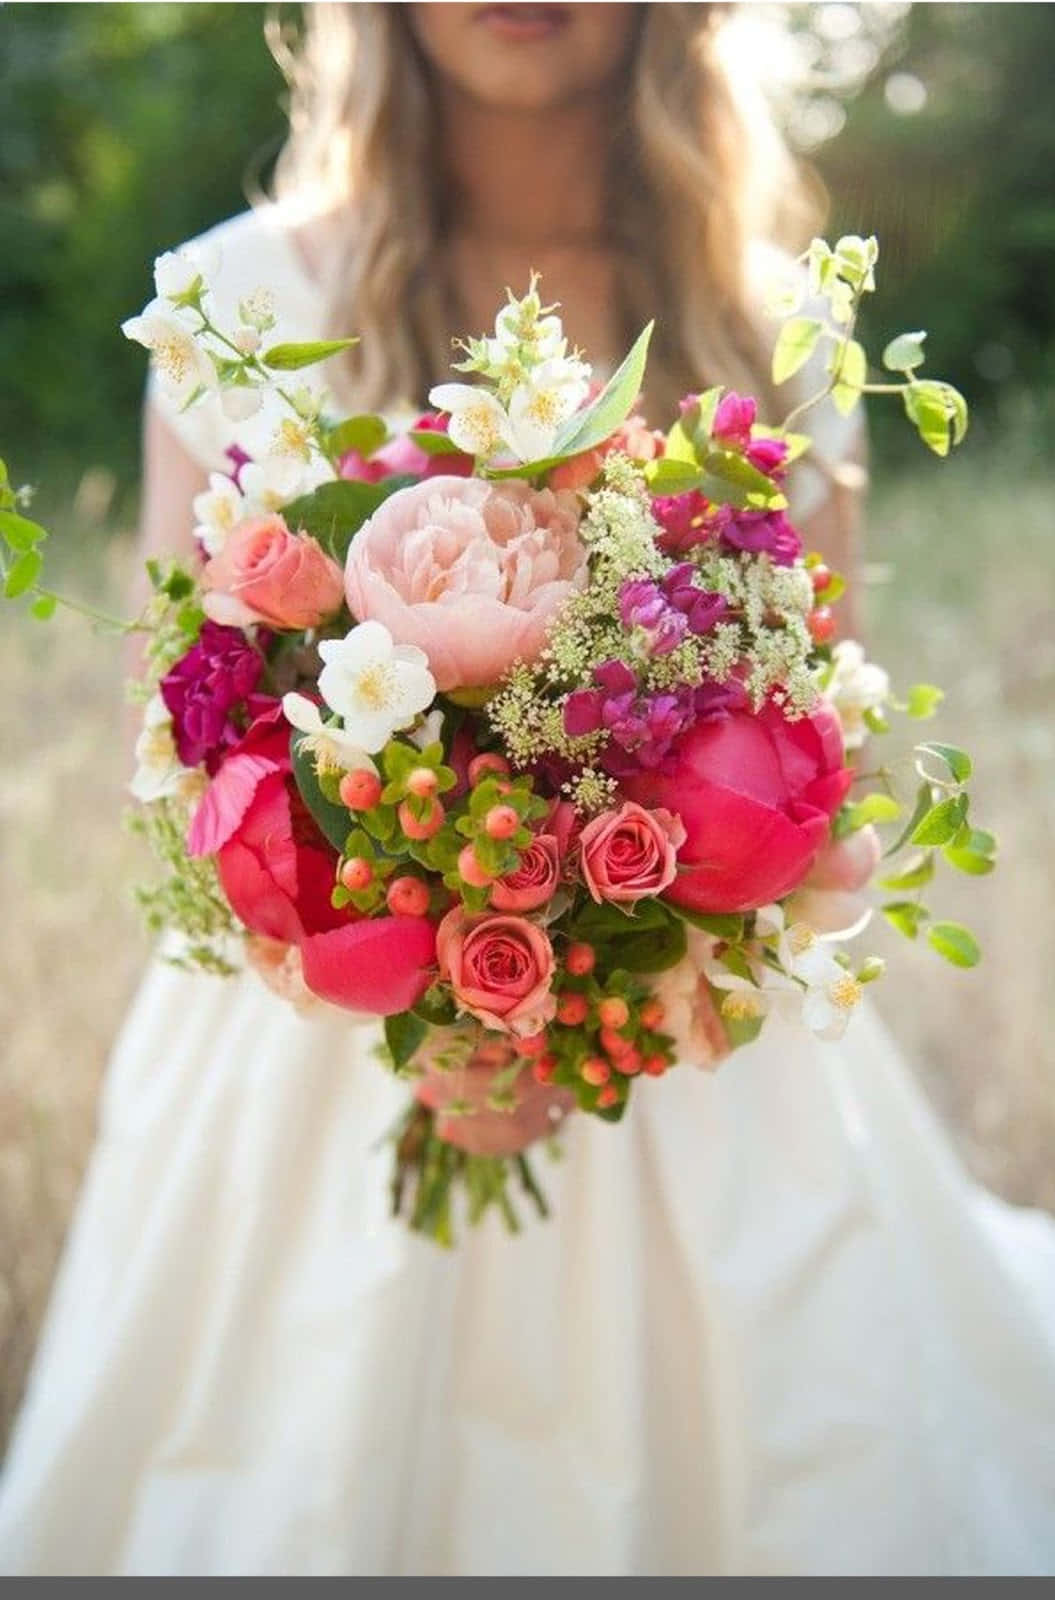 A Bride Holding A Bouquet Of Flowers